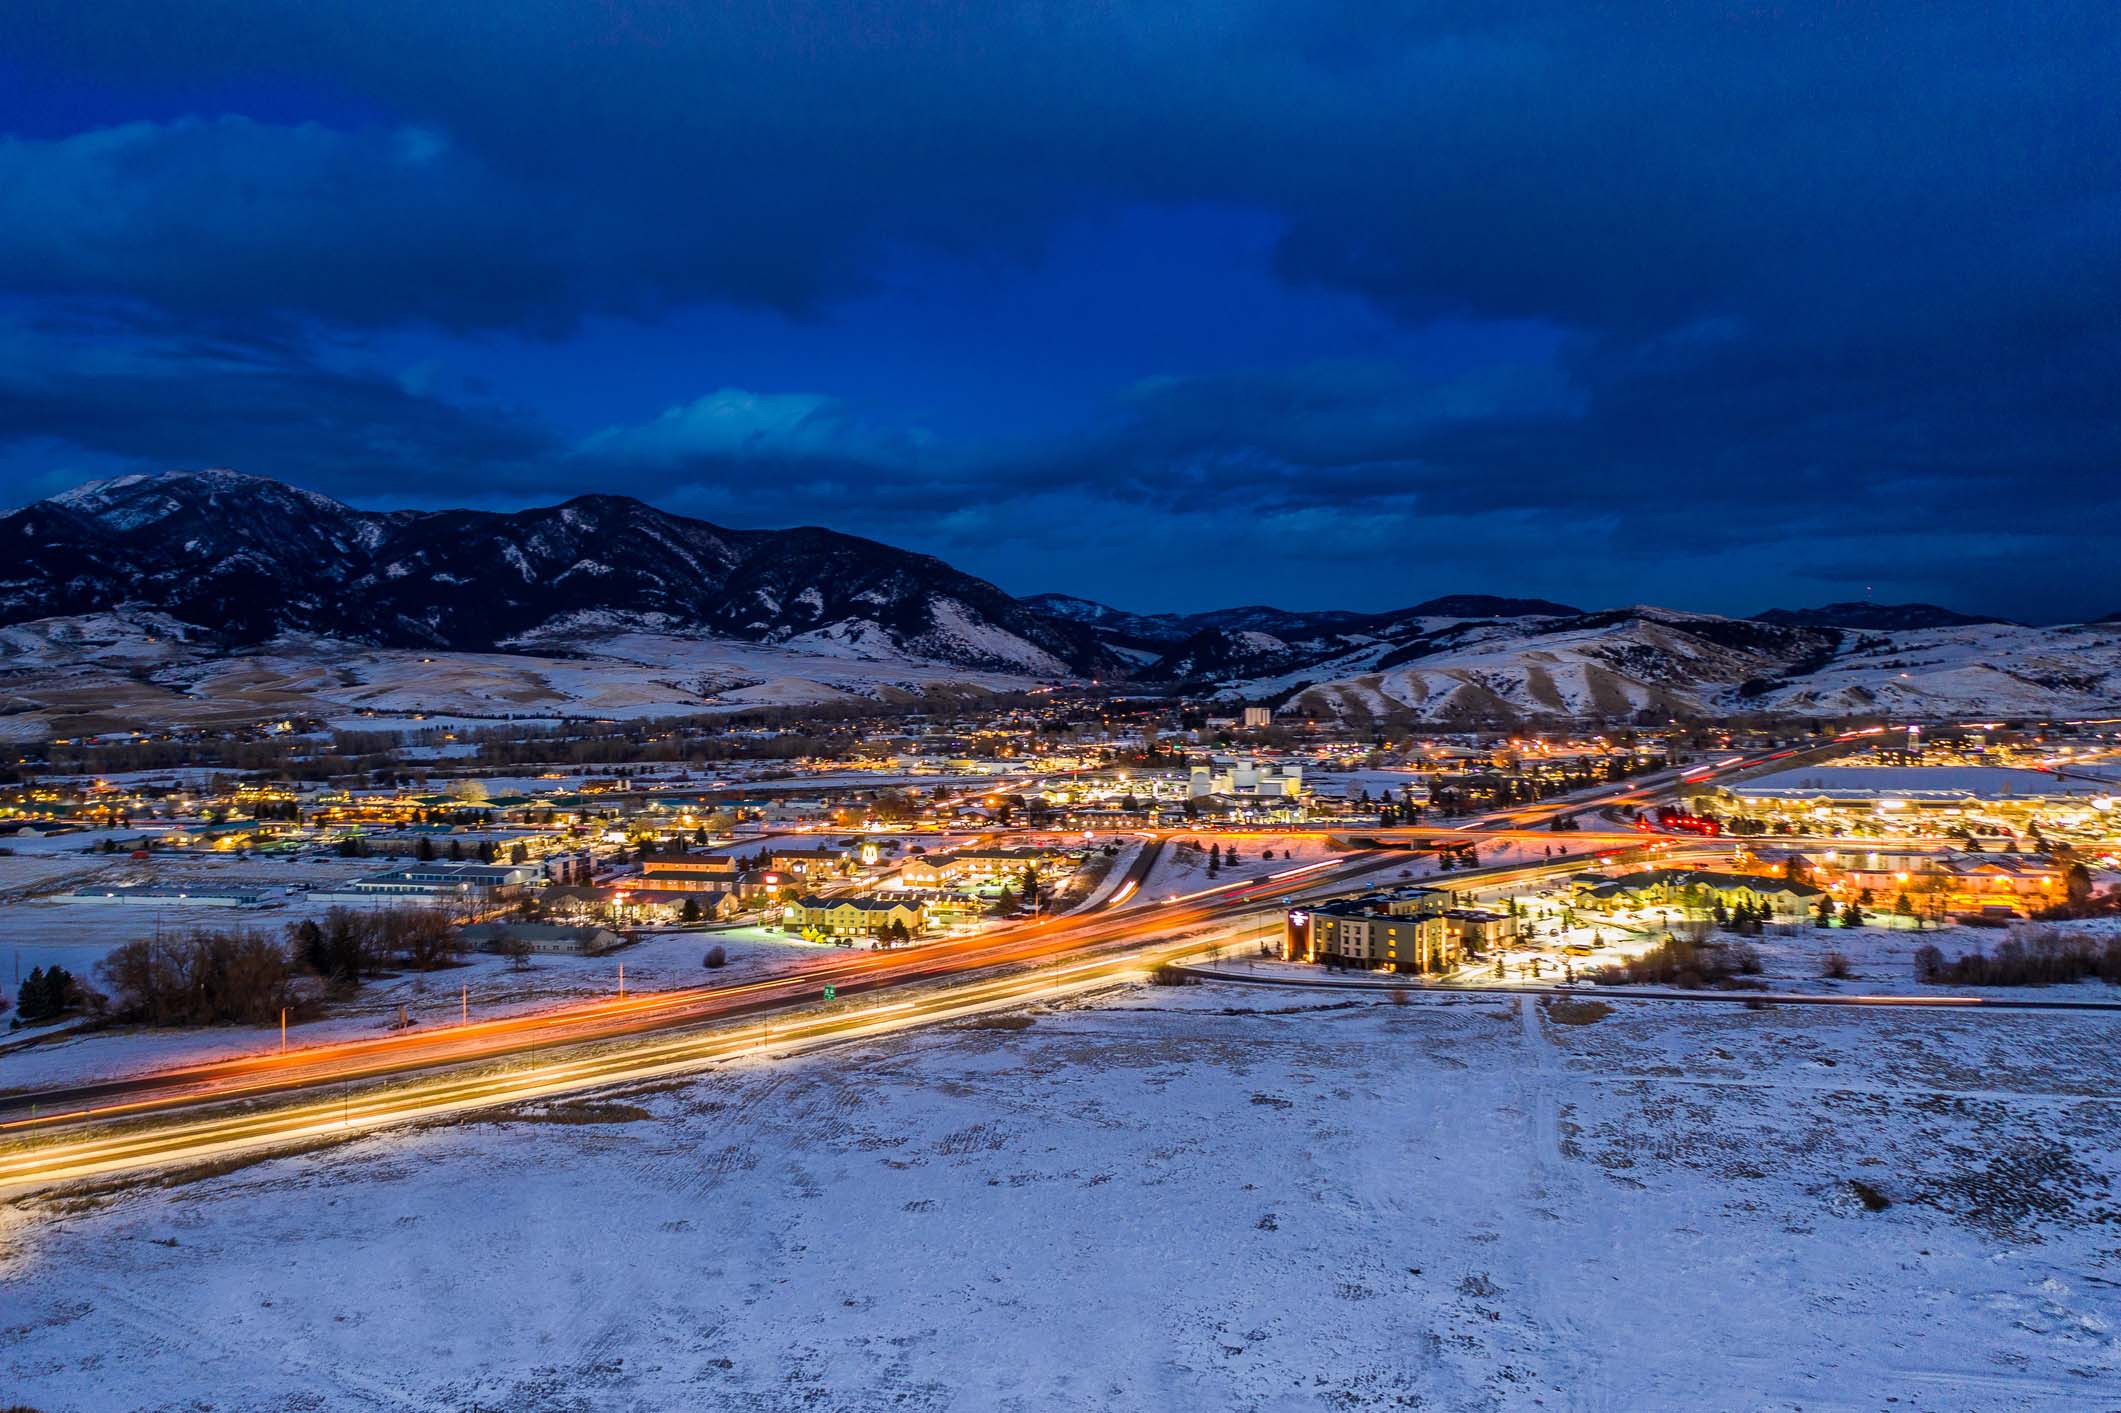 Mountain Town with snow on the ground in Montana